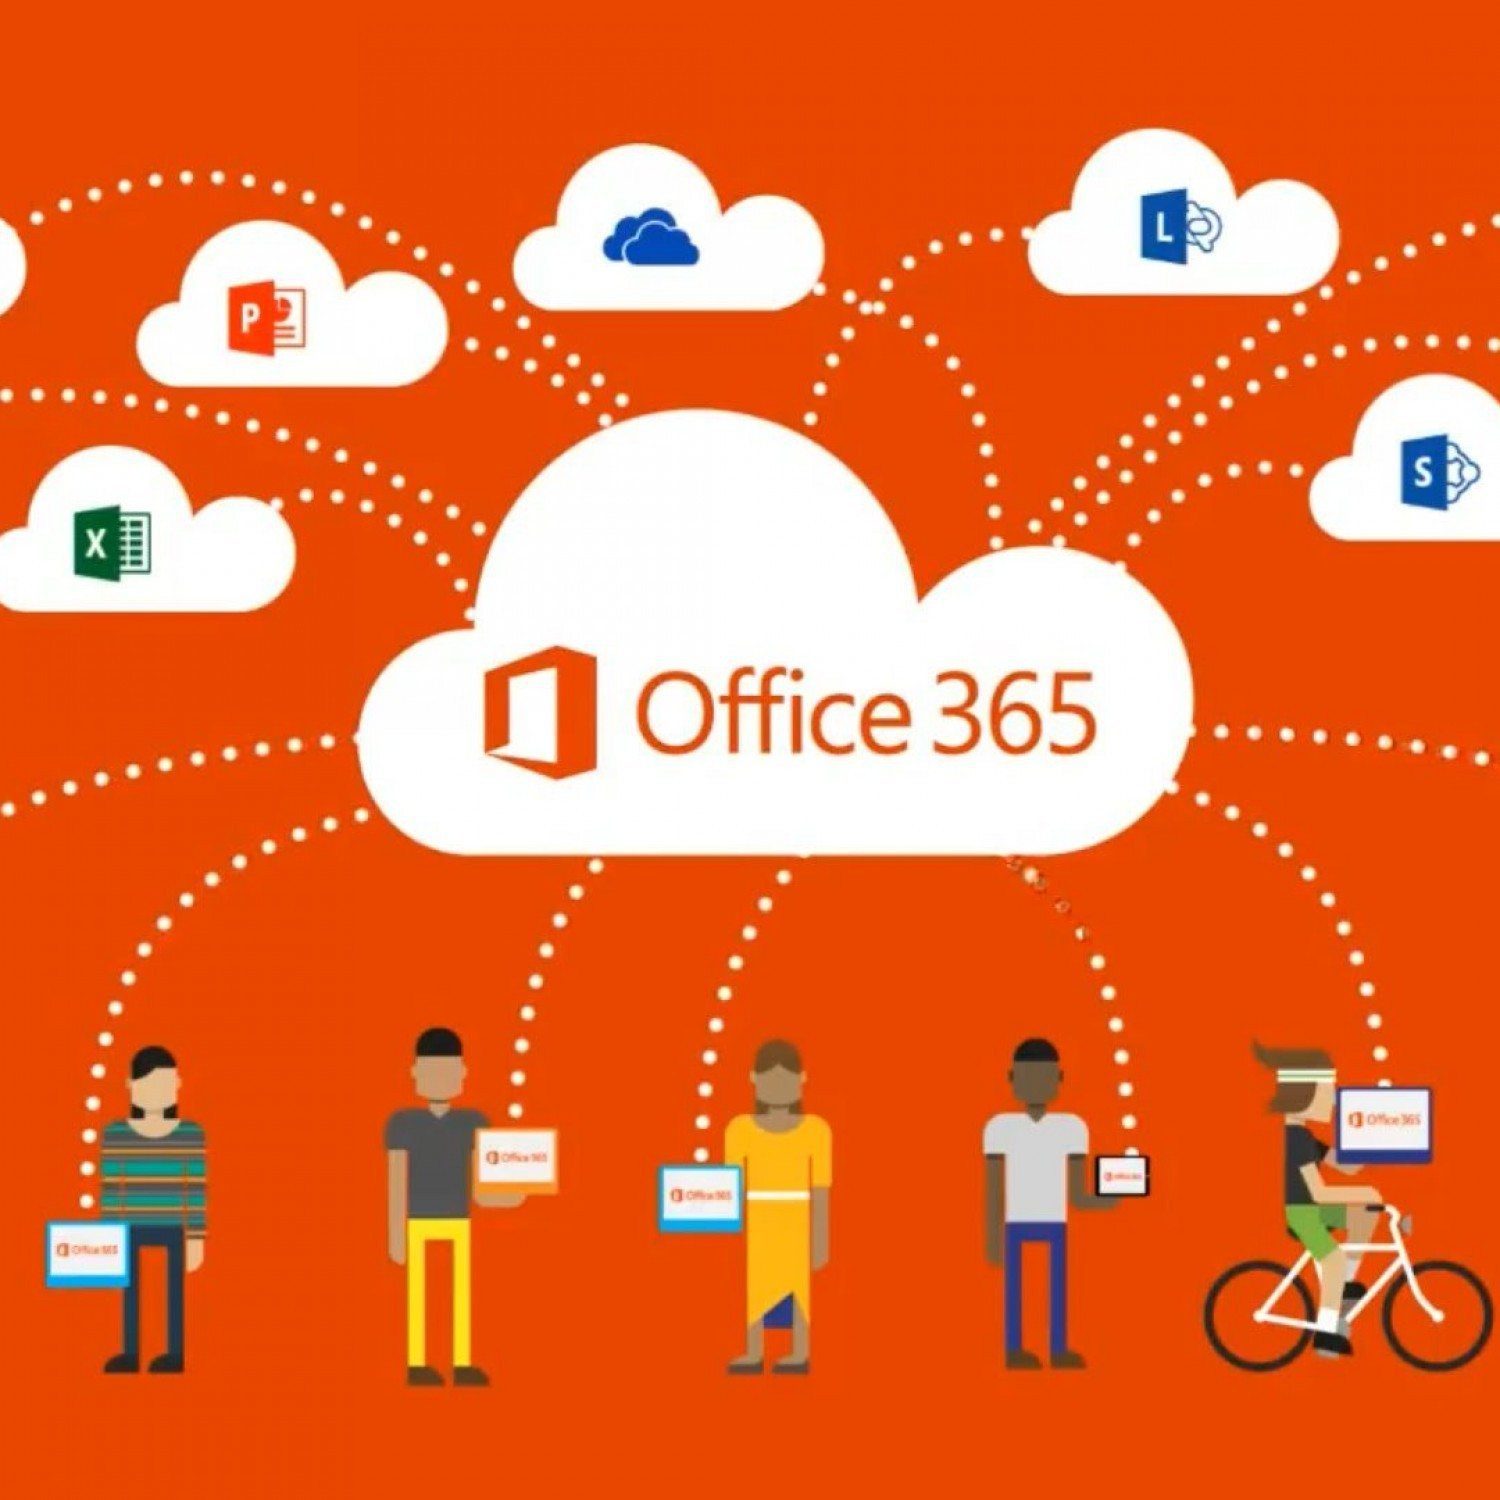 Microsoft 365 makes work and play more intuitive and natural